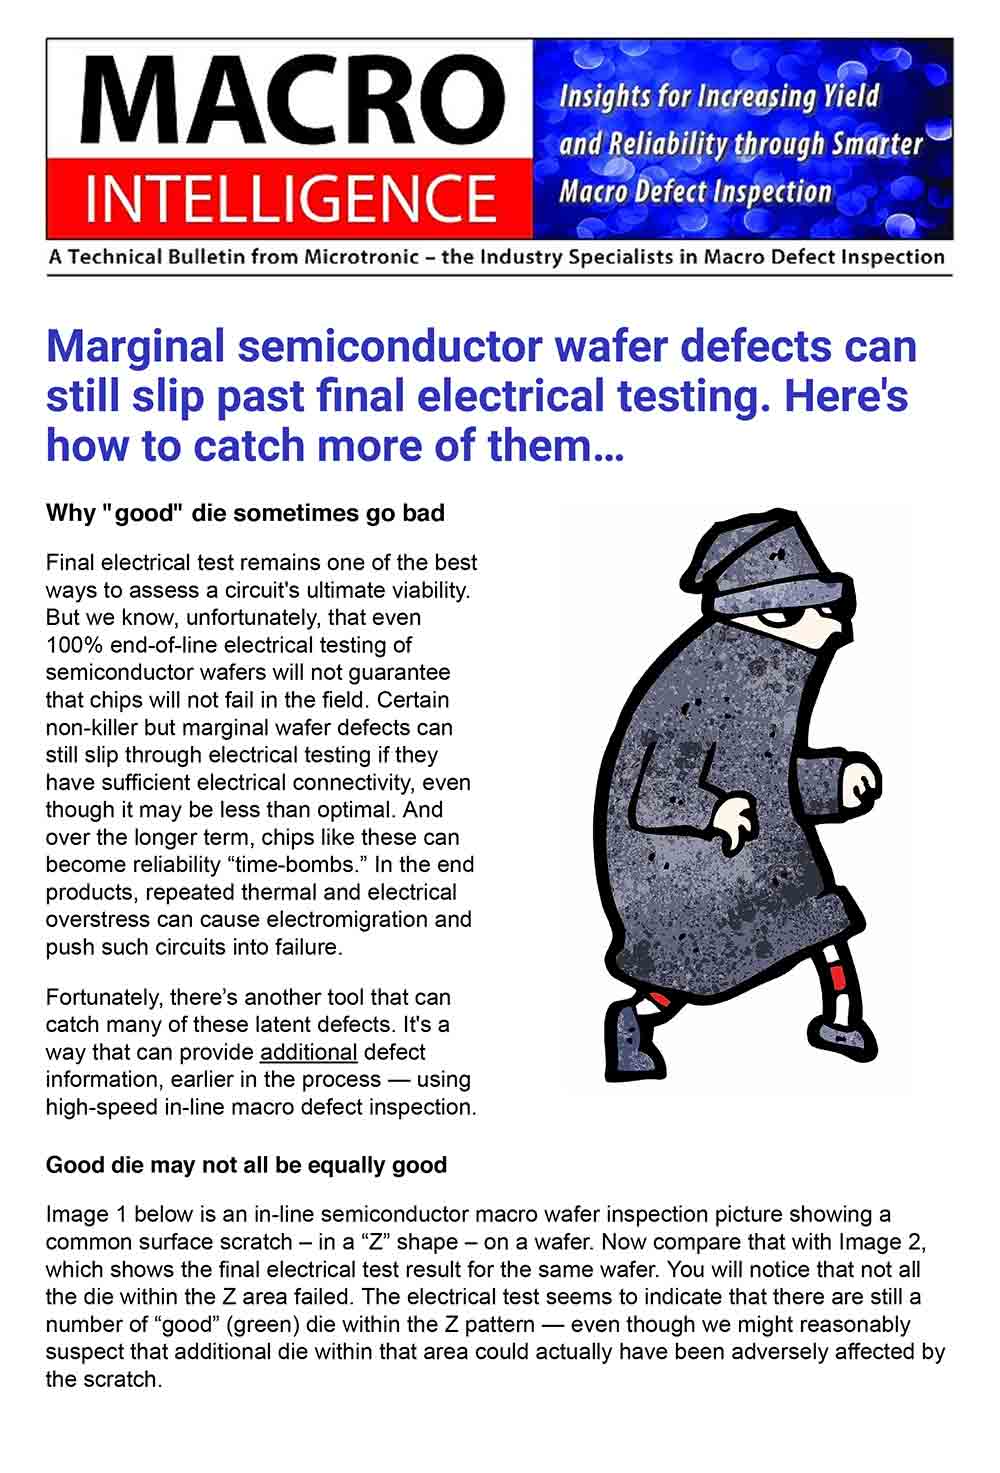 Marginal semiconductor wafer defects can still slip past final electrical testing. Here's how to catch more of them...